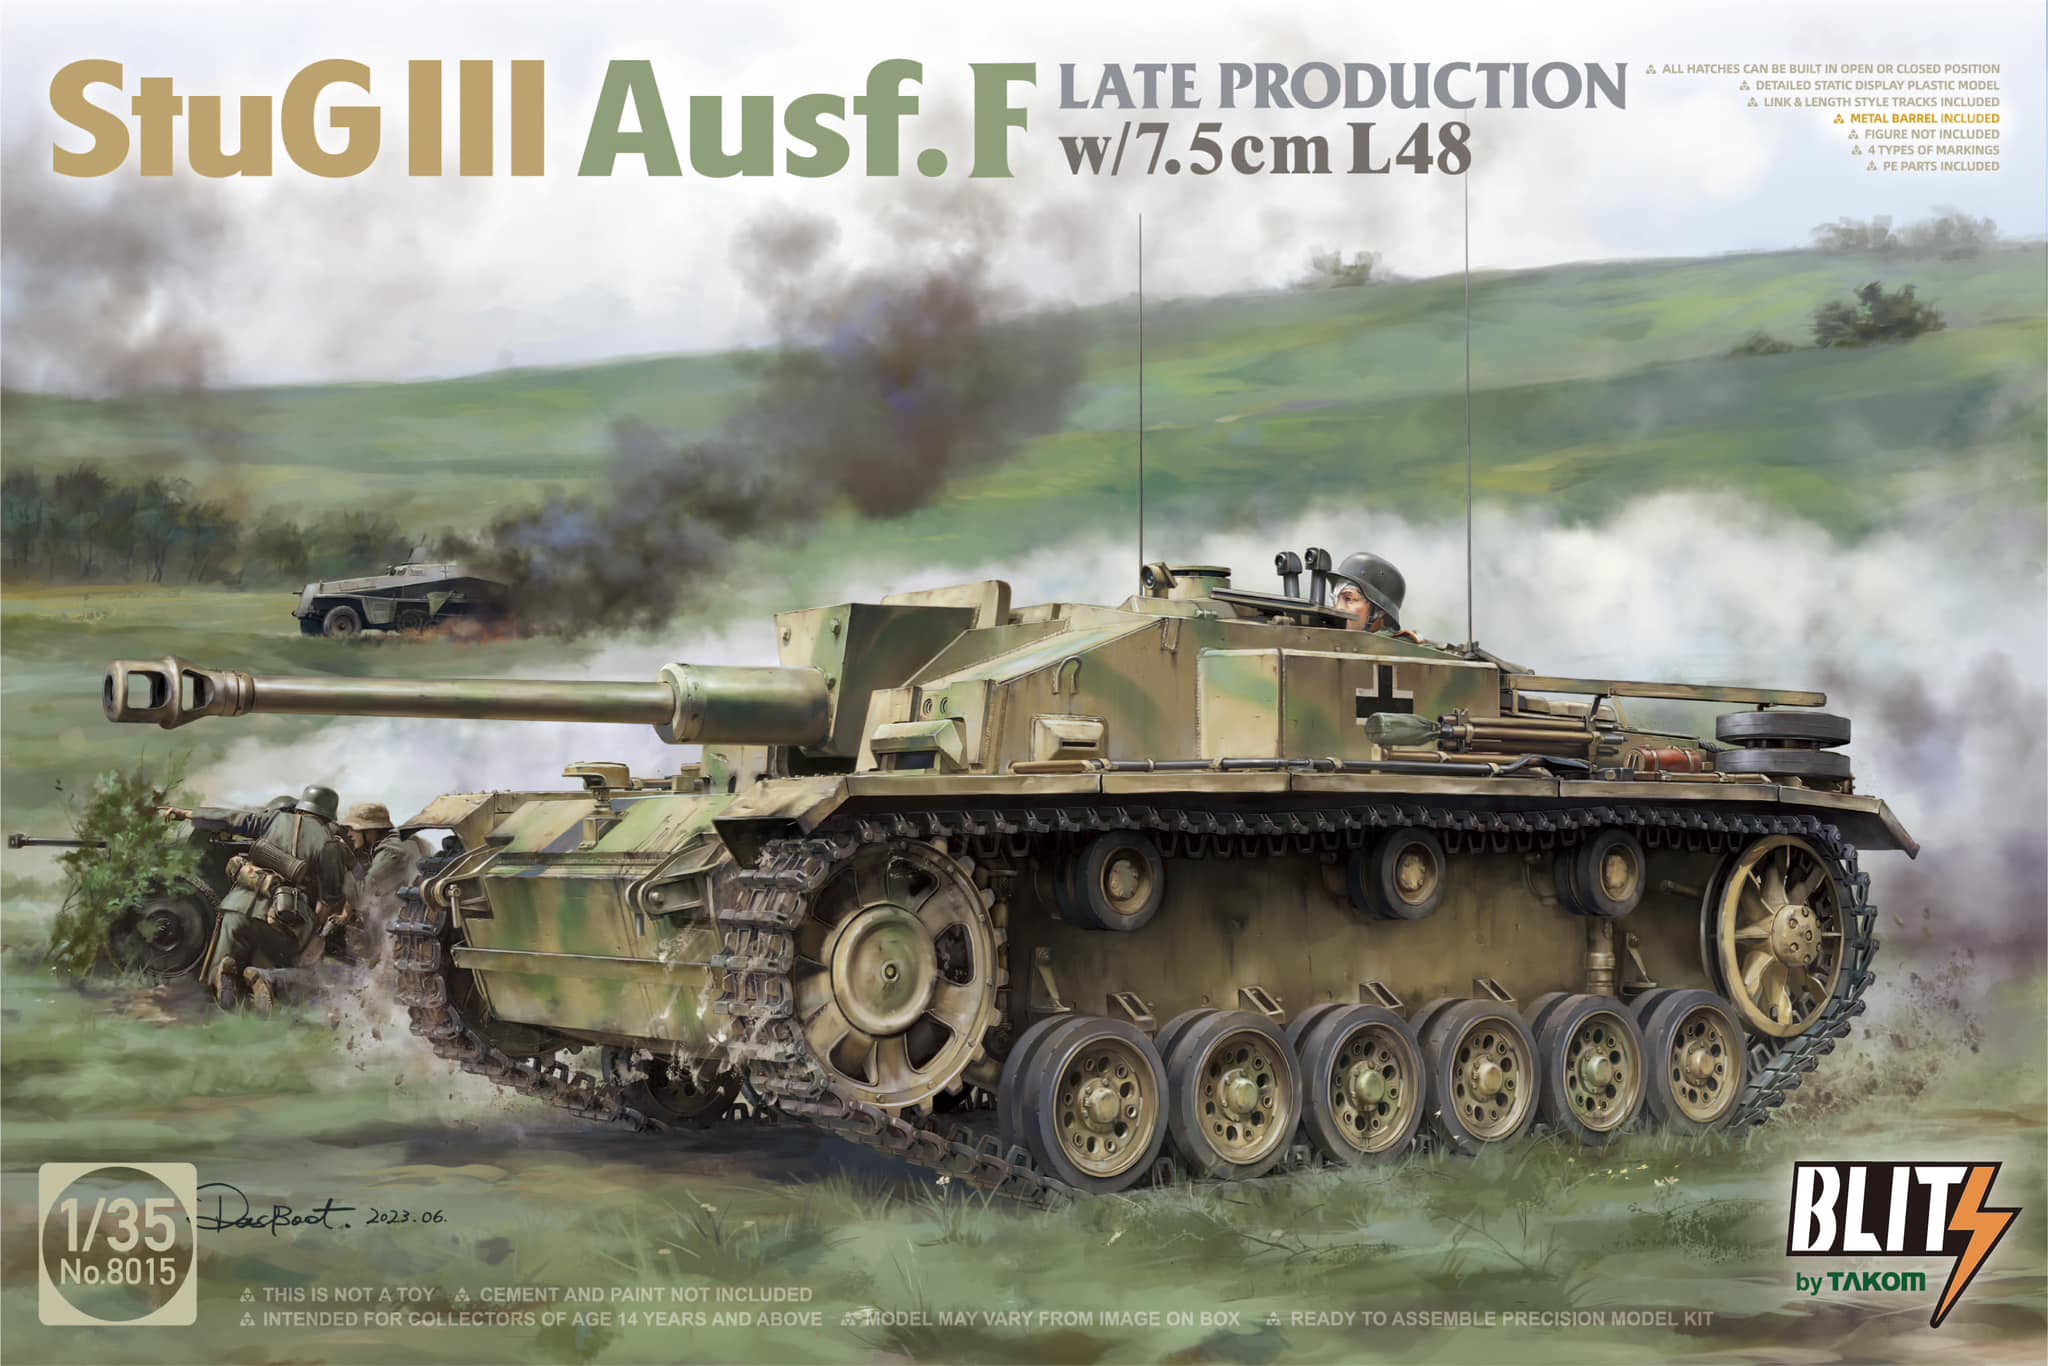 StuG III Ausf. F Late Production with 7,5 cm L48